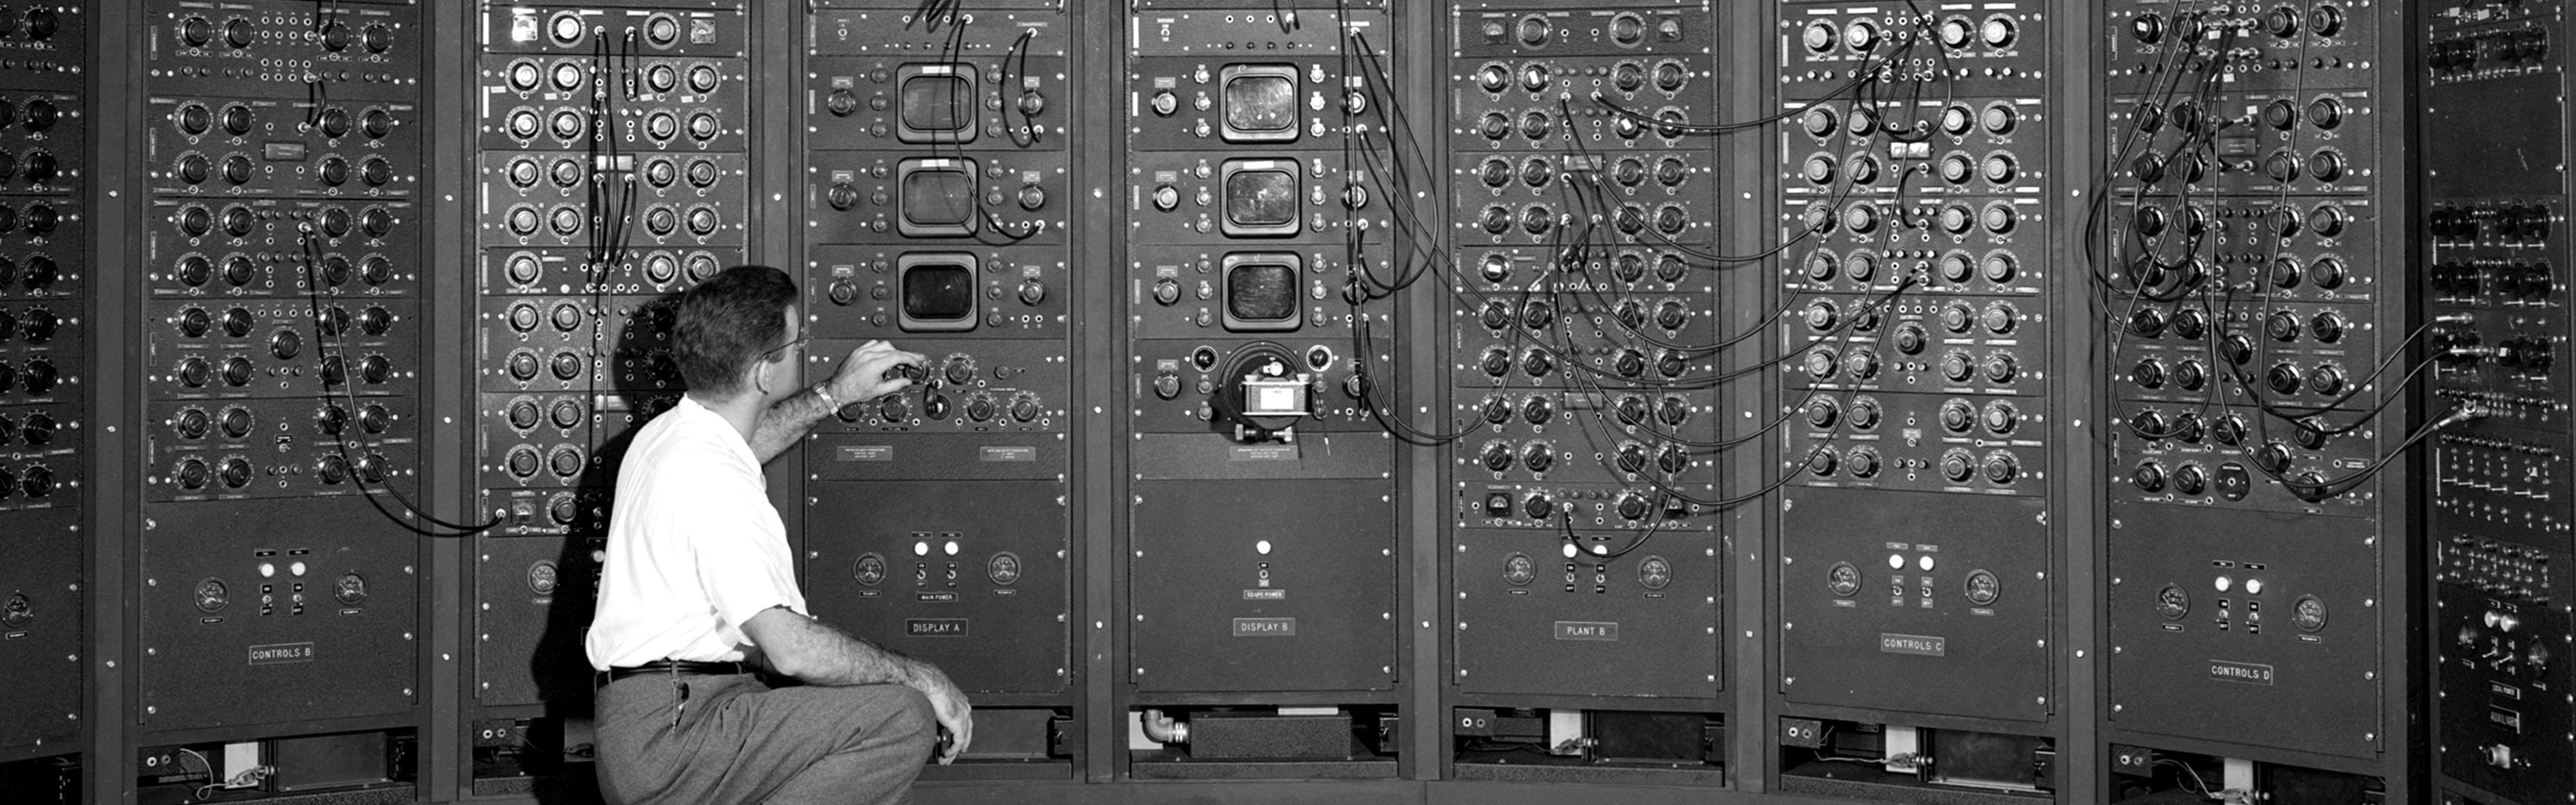 An operator at a fuel systems computer from the mid 20th century.